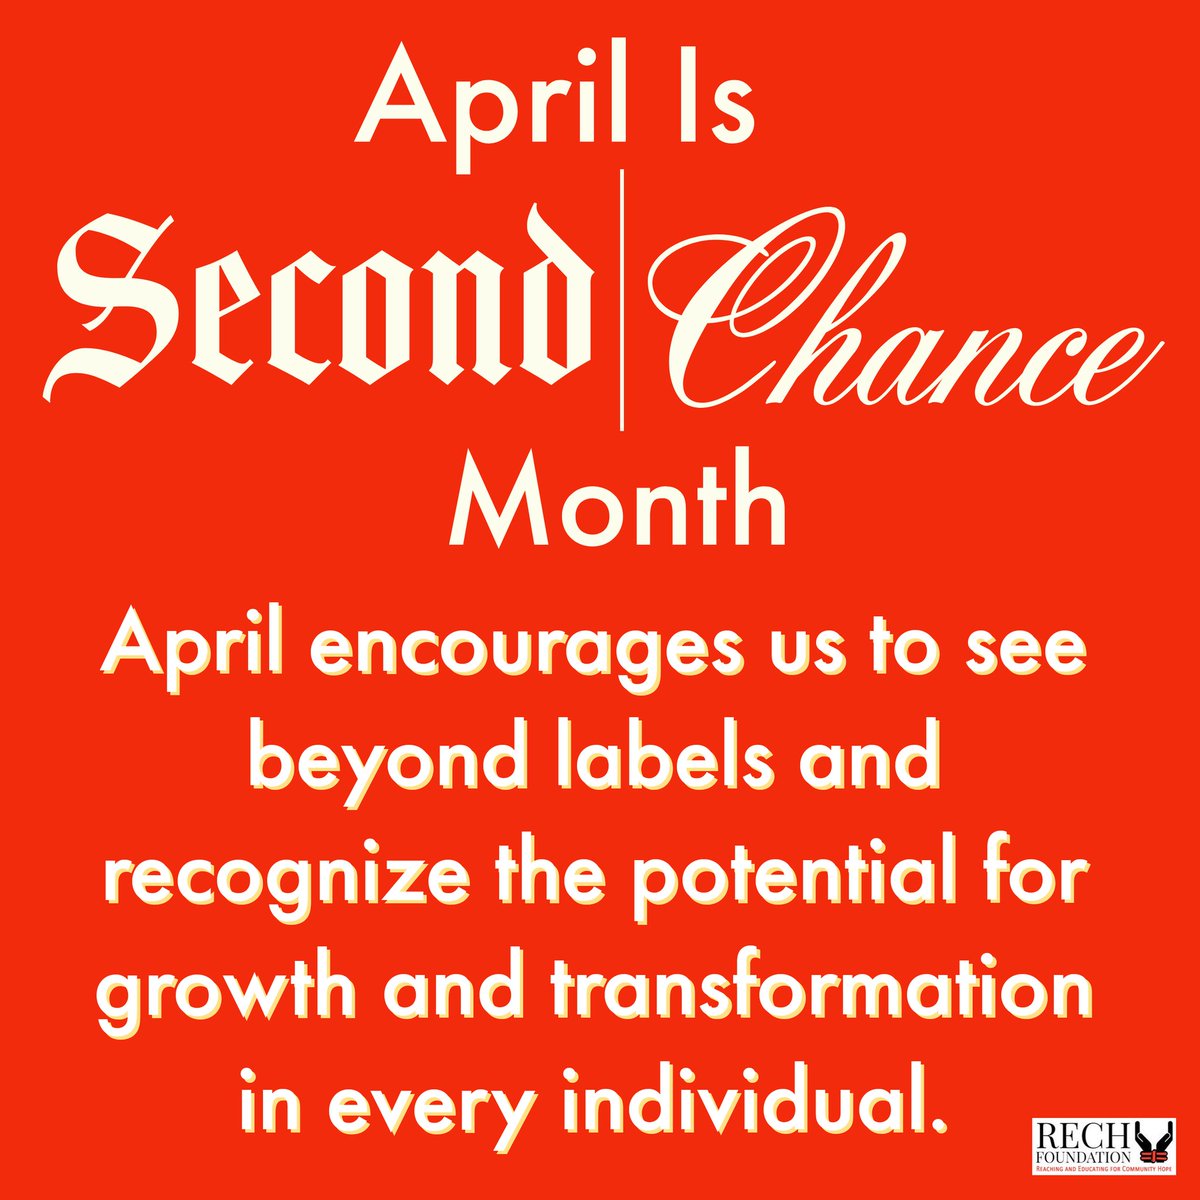 April encourages us to see beyond labels and recognize the potential for growth & transformation in every individual #secondchances #SecondChanceMonth #potential #transformation #rehabilitation #reentry #reintegration #helpinthehouse #solutionist #iamaningredient #JusticeGeneral